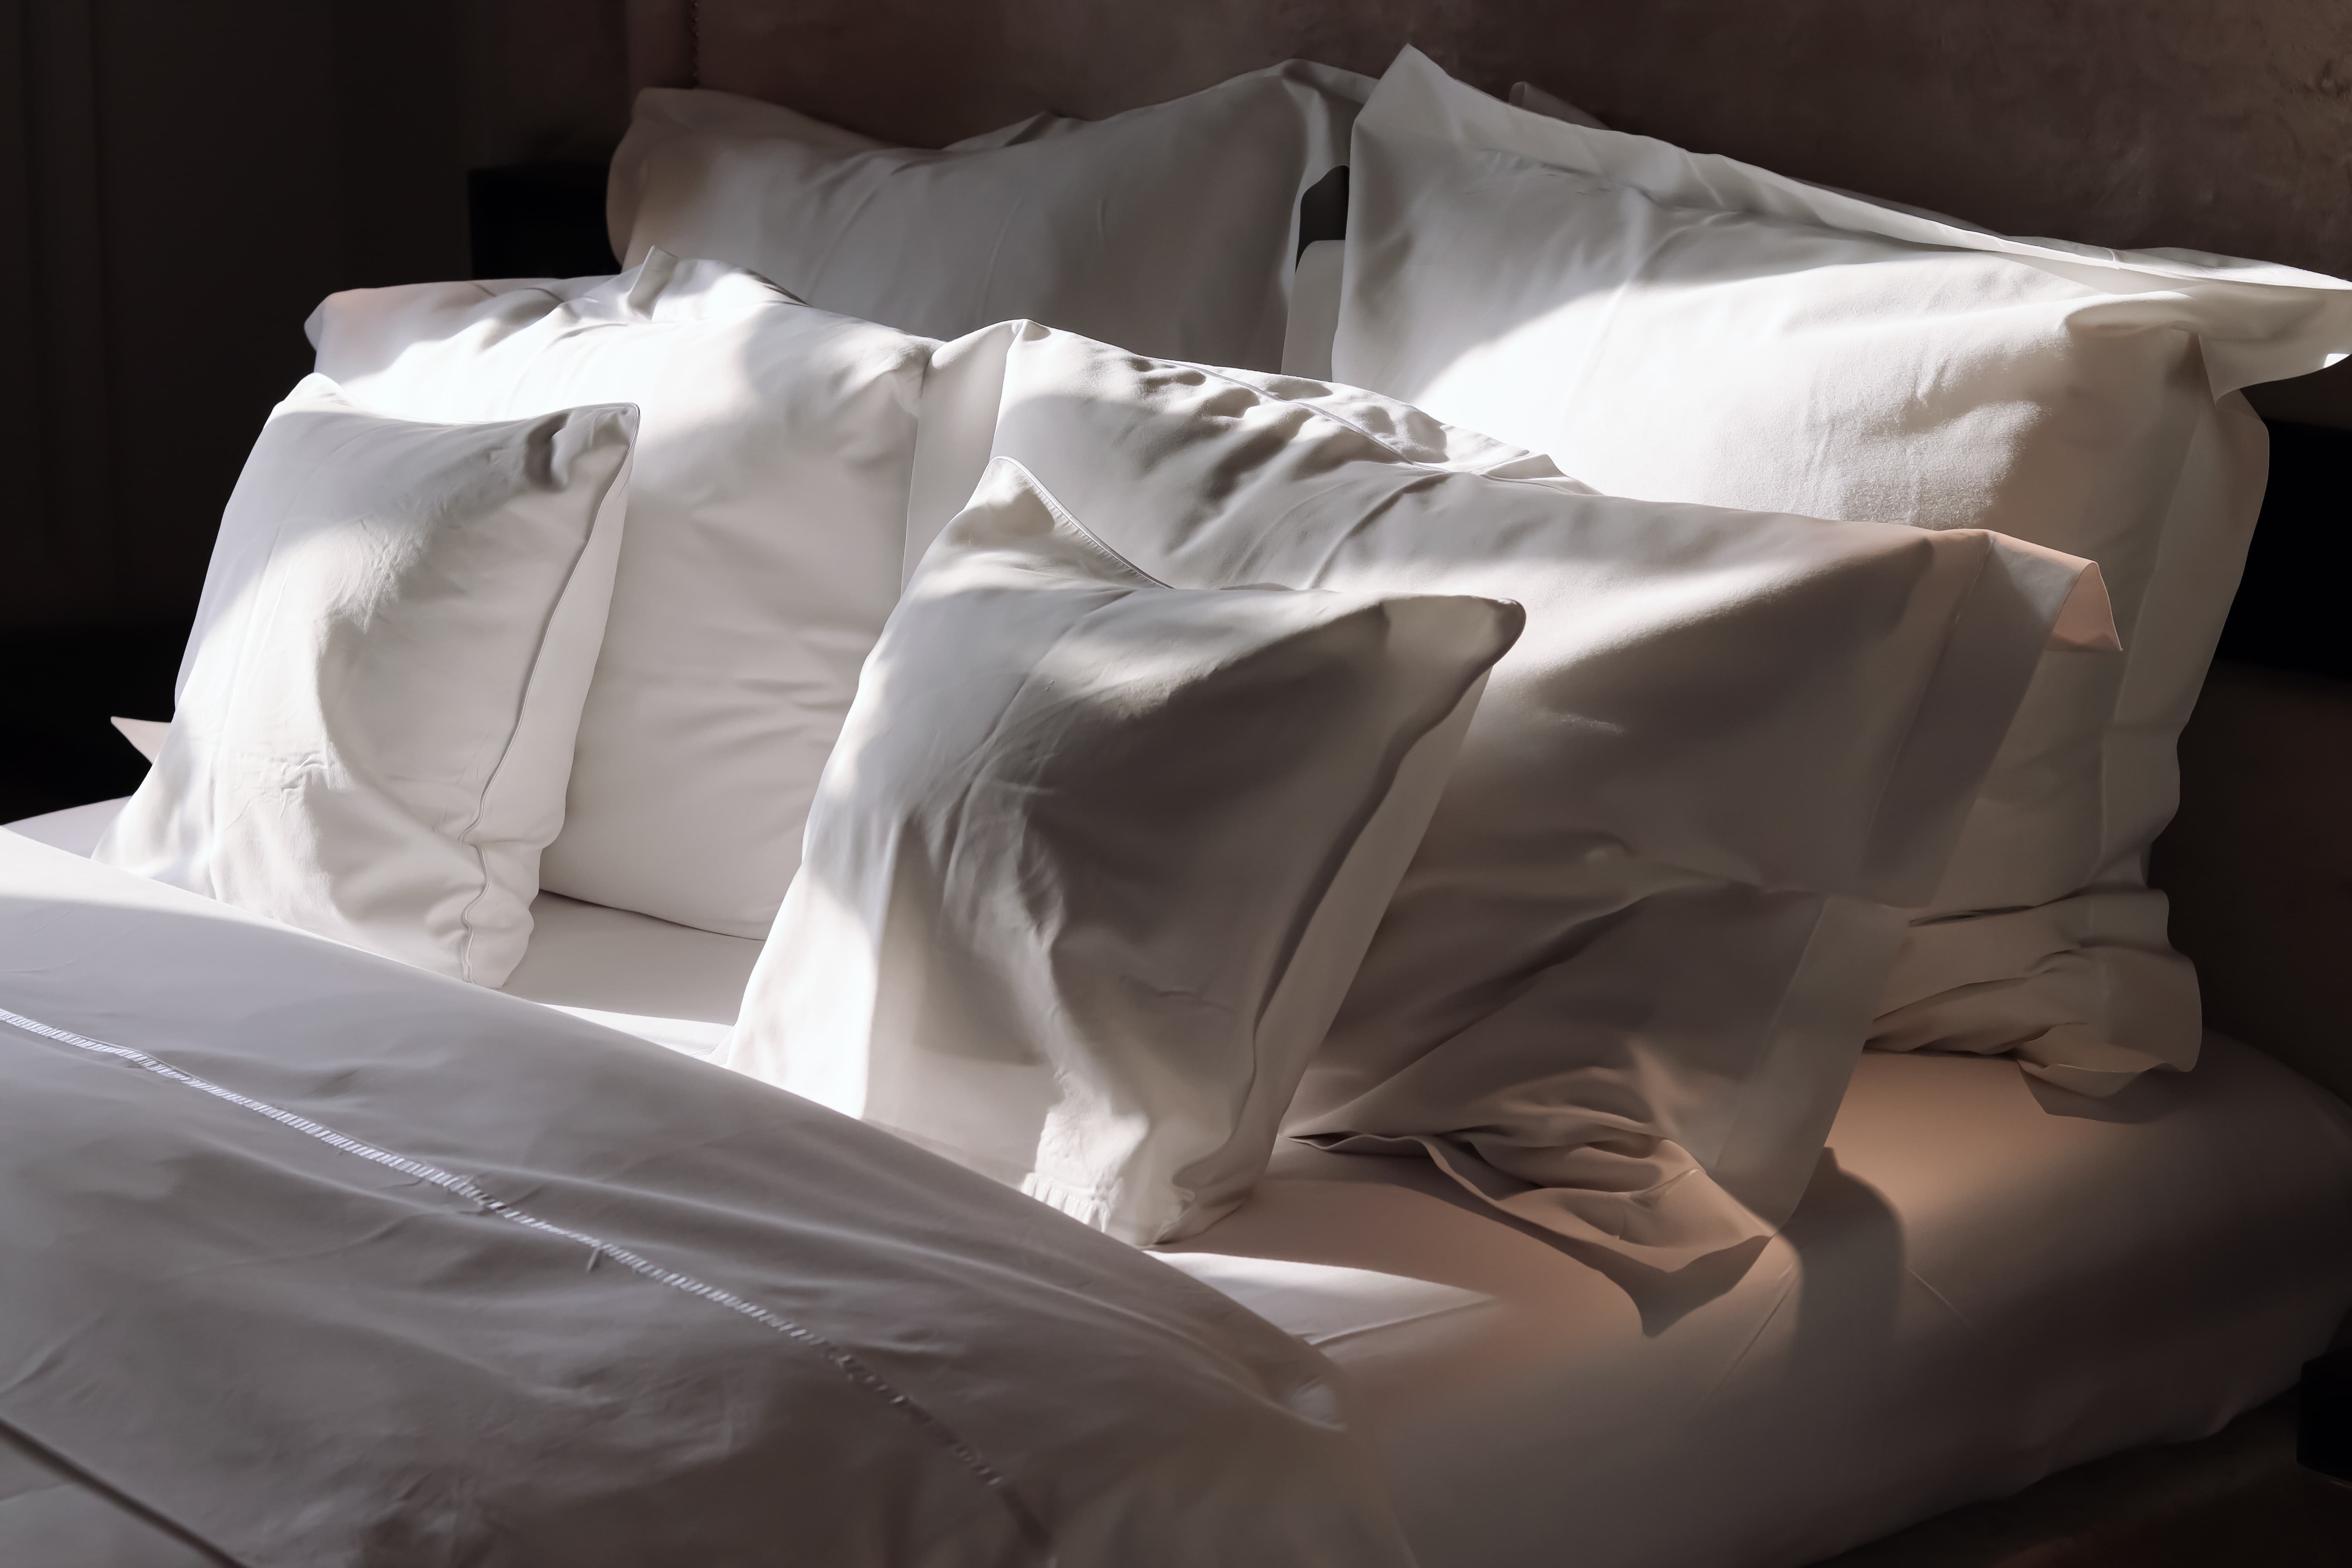 5 Reasons Why You Should Avoid Sleeping on a Cotton Pillowcase